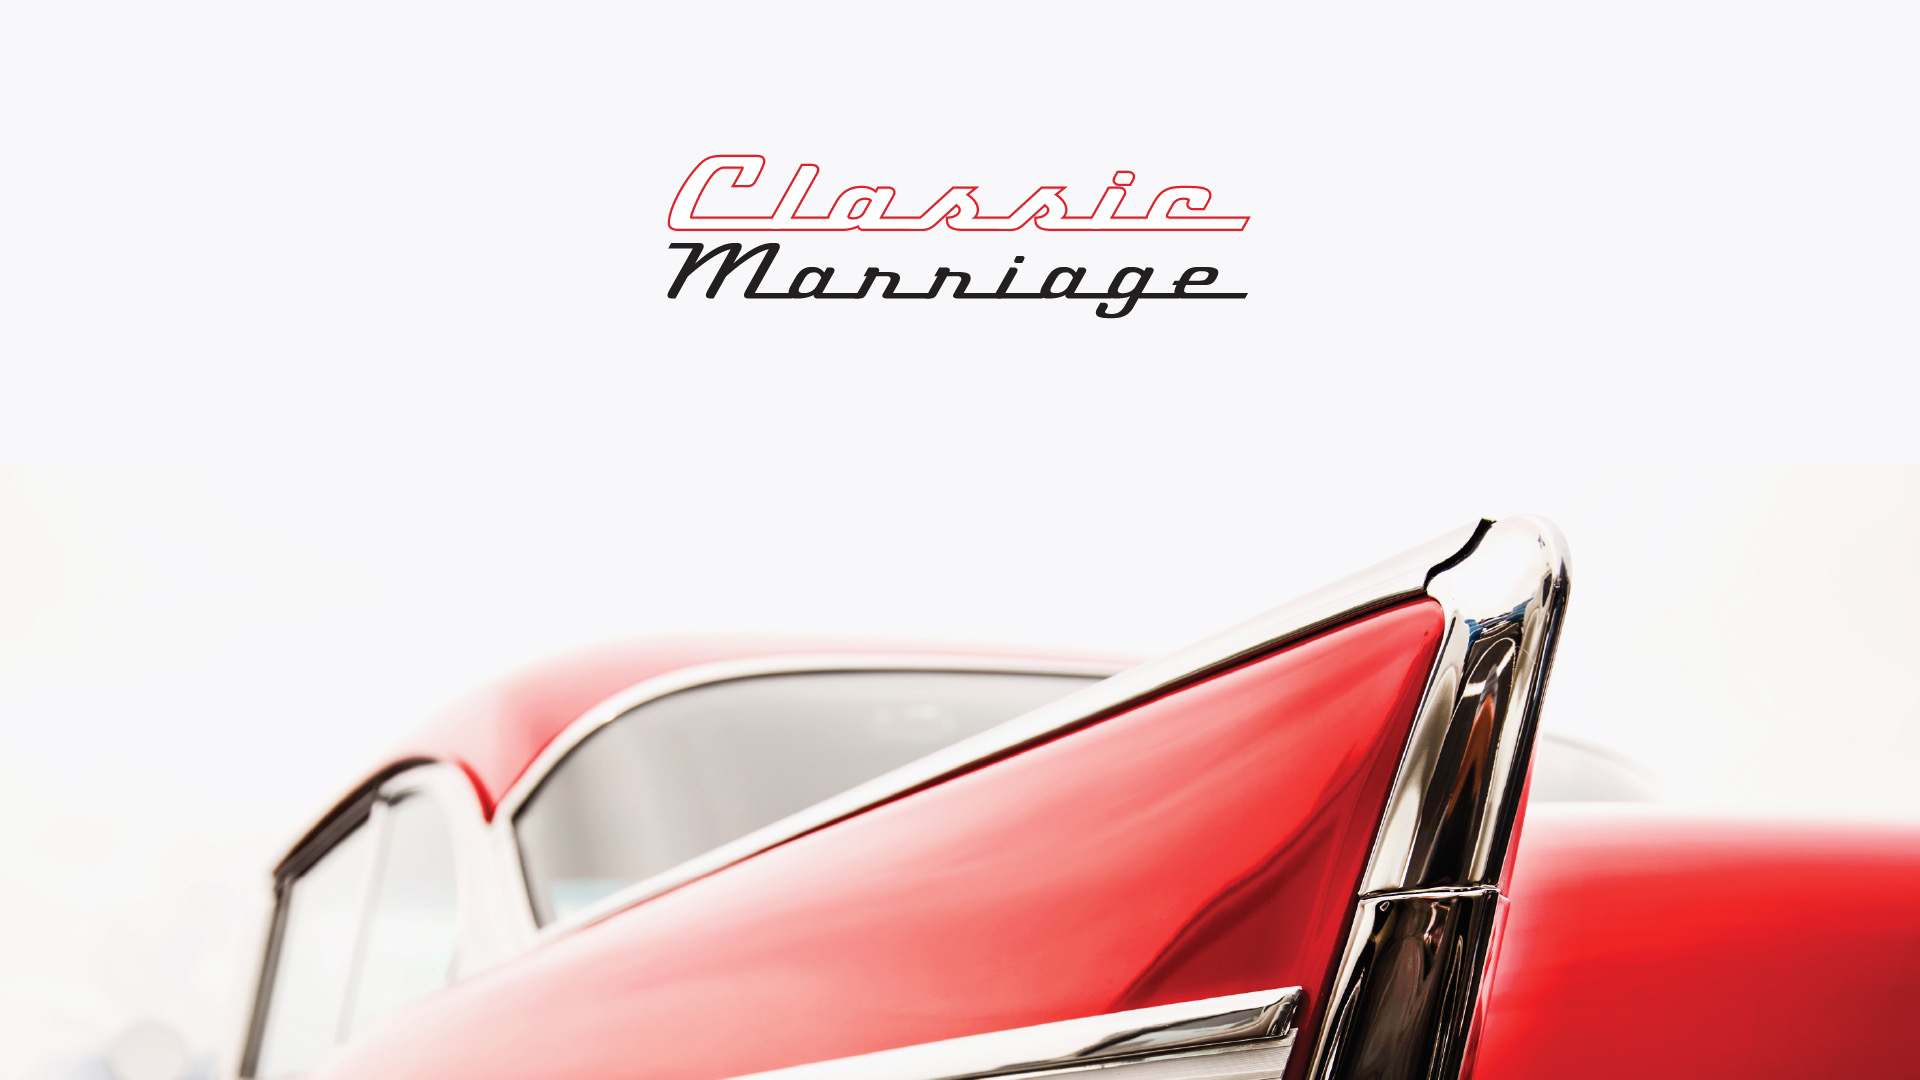 Find out God's design for marriage